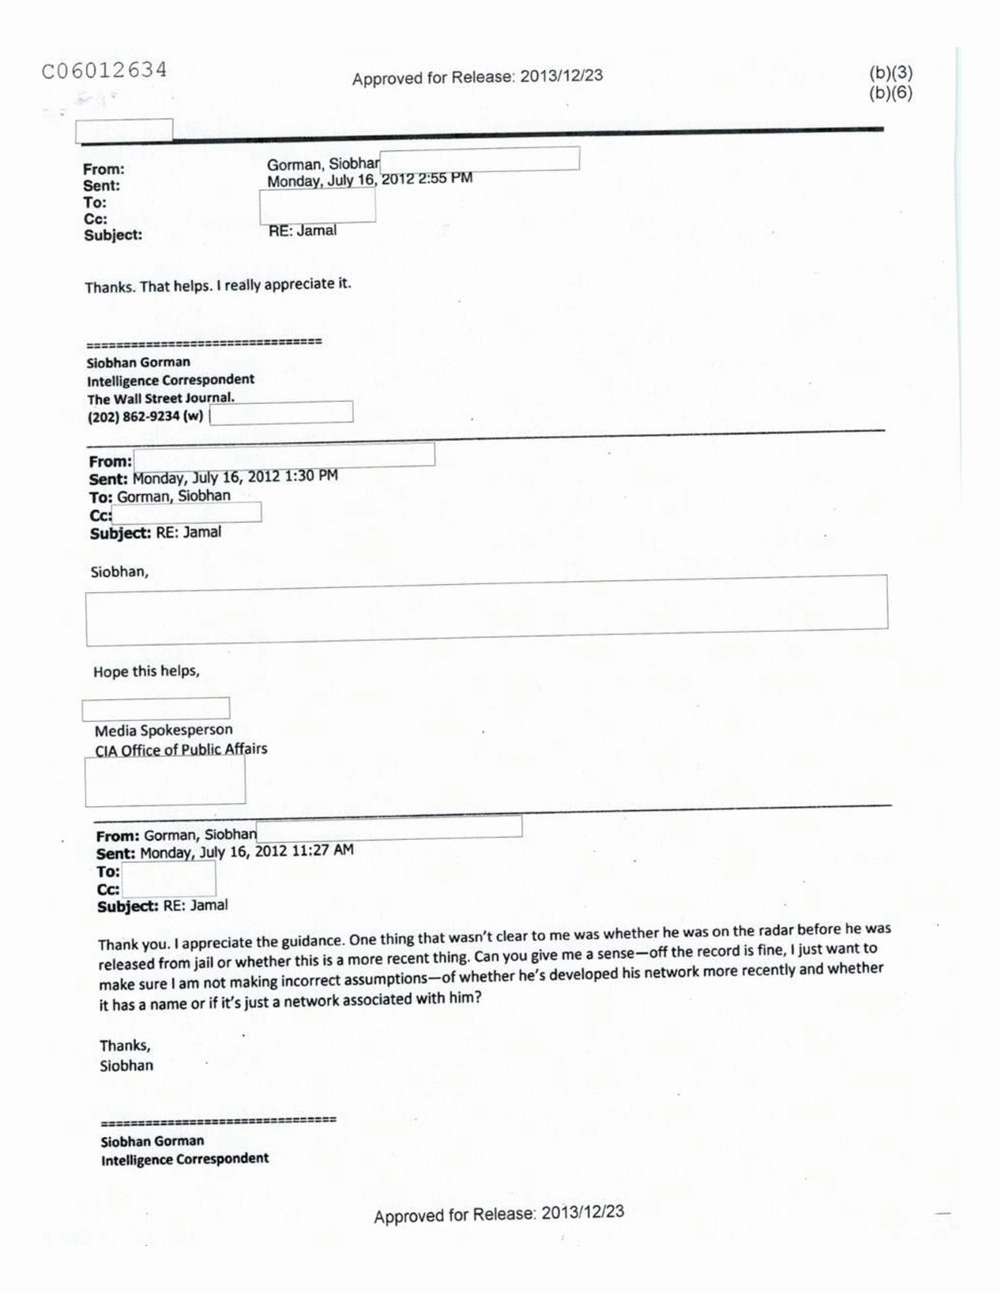 Page 195 from Email Correspondence Between Reporters and CIA Flacks